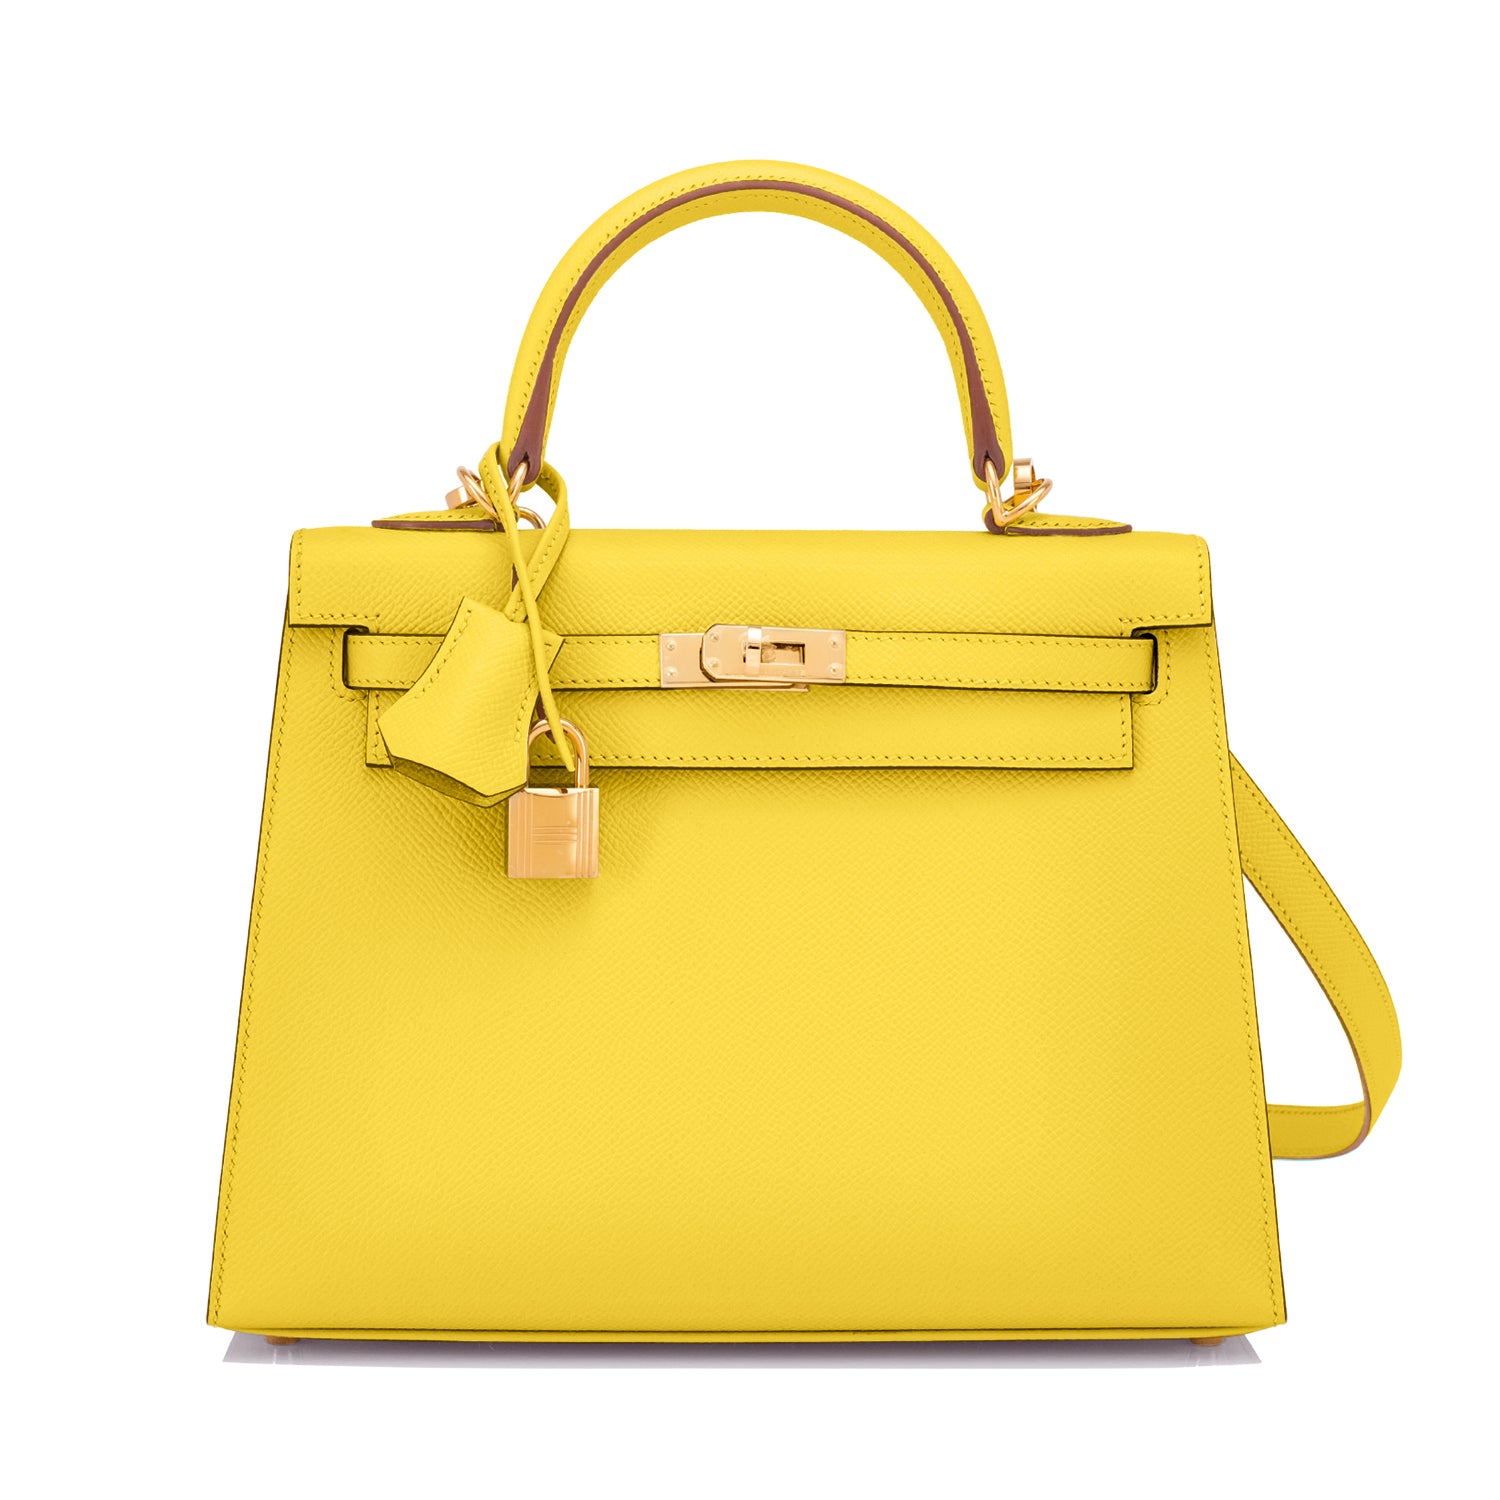 Replica Hermes Kelly 25cm Sellier Bag In Yellow Epsom Leather